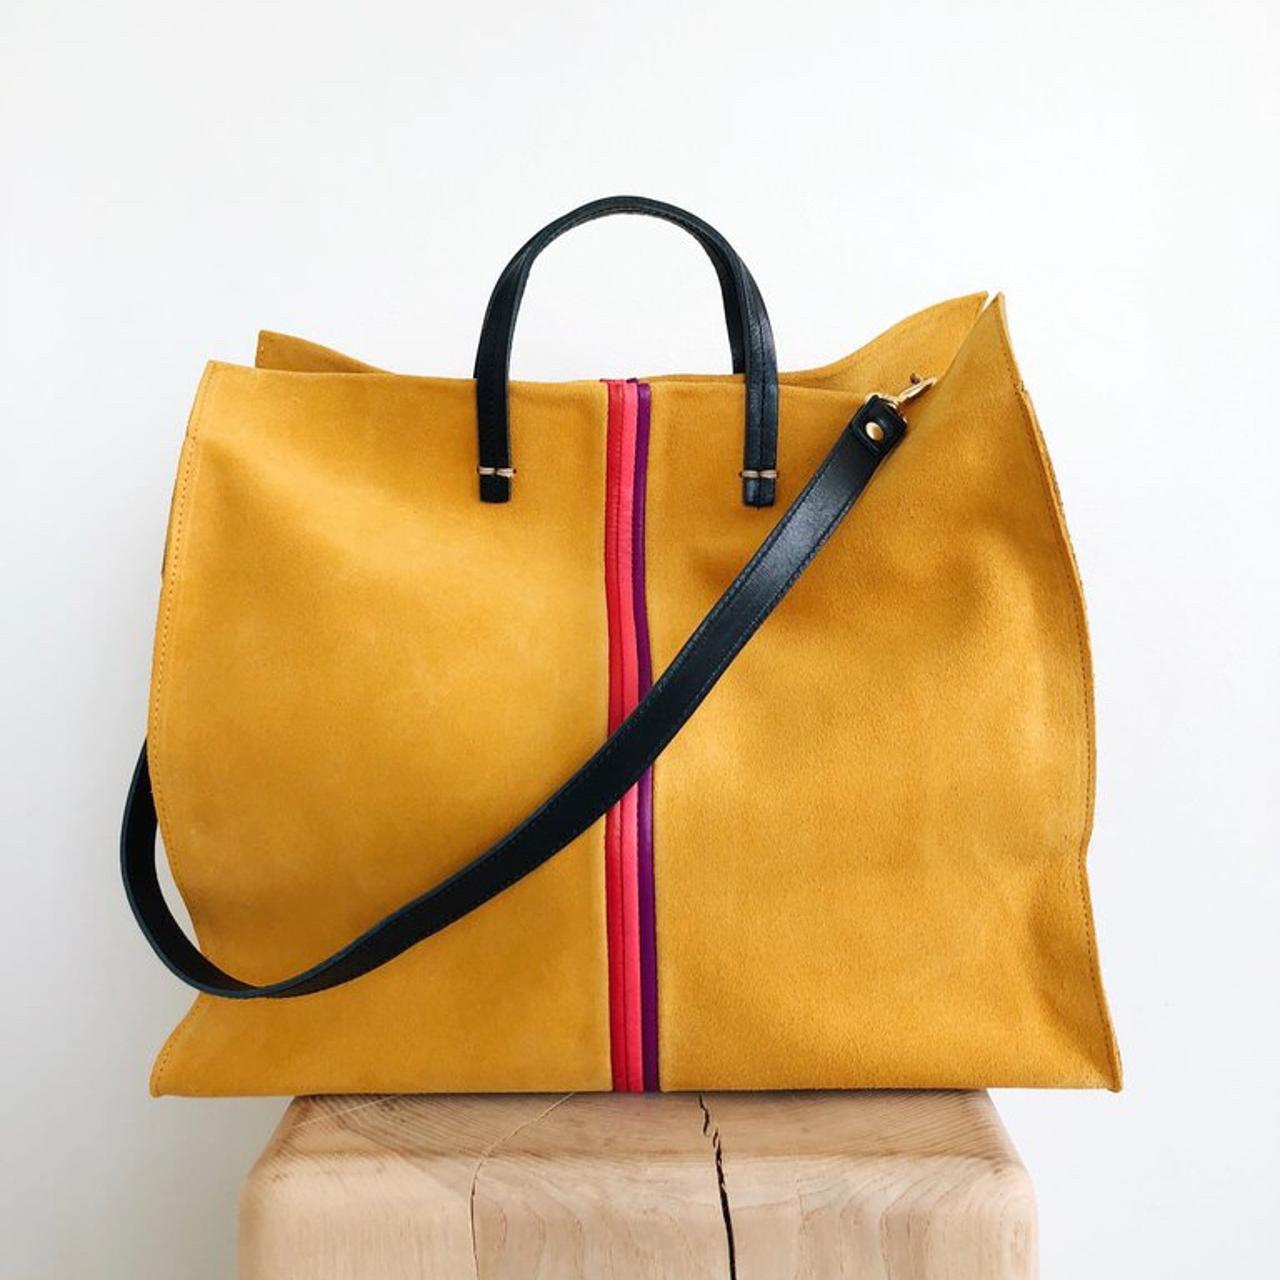 Clare V. Summer Simple Tote in Black